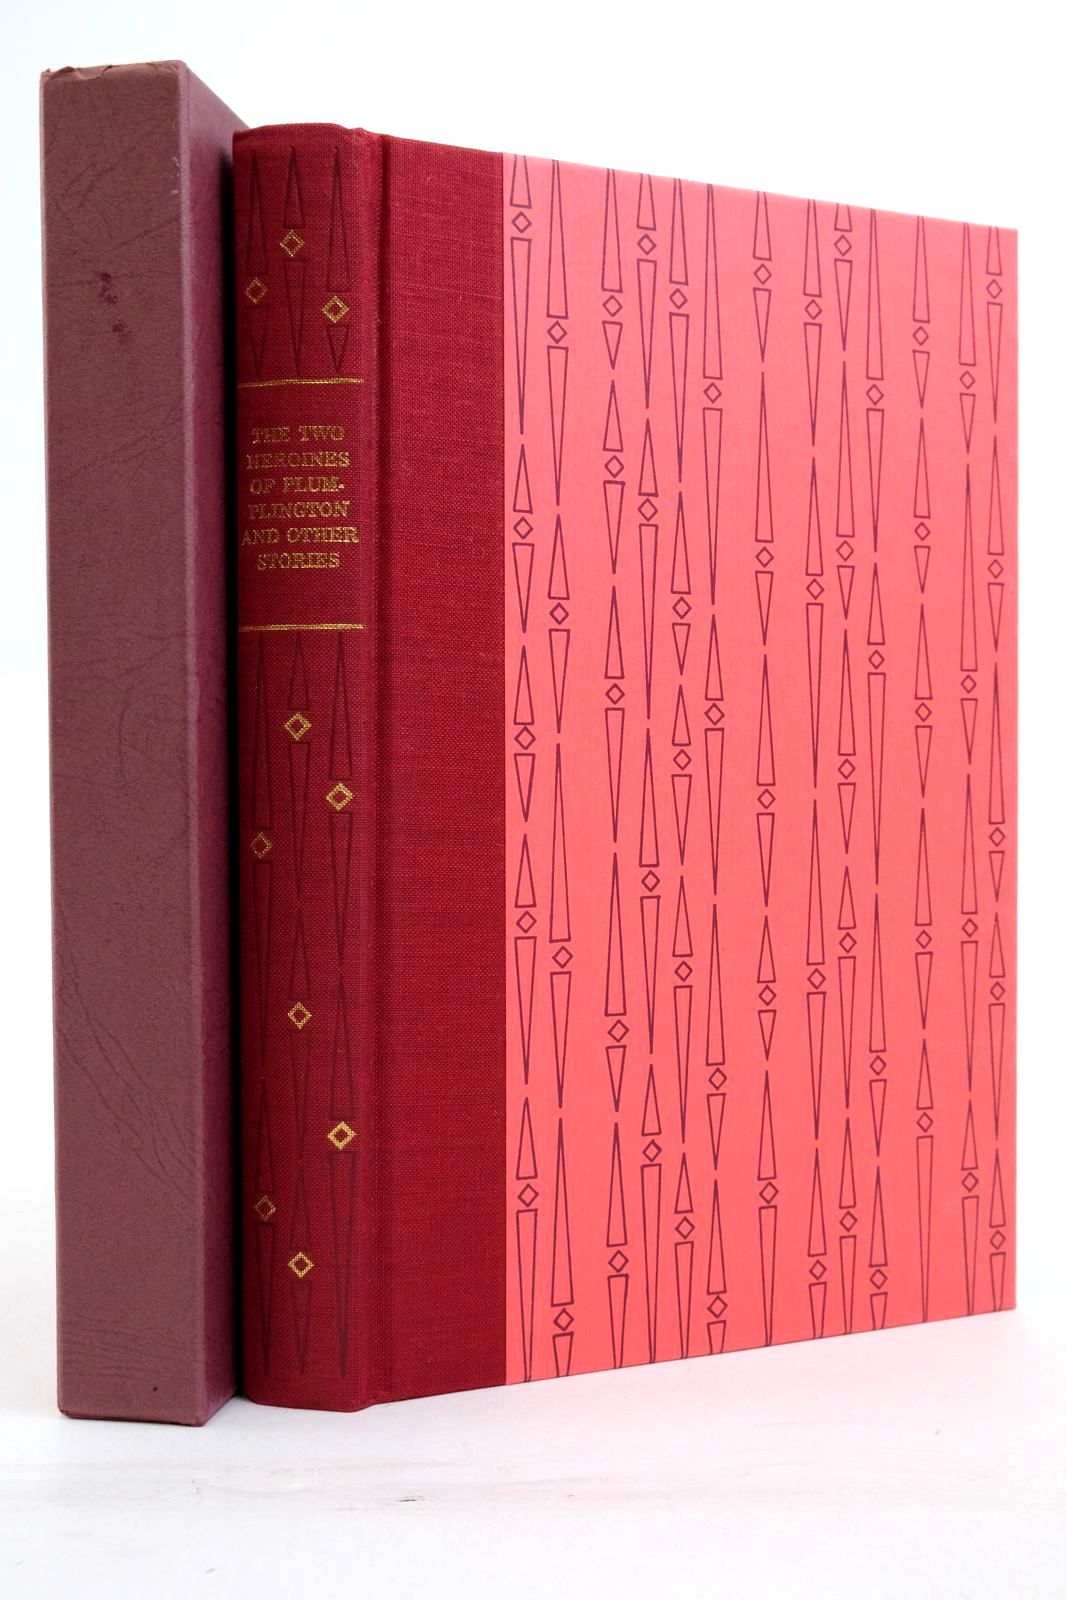 Photo of THE TWO HEROINES OF PLUMPLINGTON AND OTHER STORIES written by Trollope, Anthony Symons, Julian illustrated by Reddick, Peter published by Folio Society (STOCK CODE: 2138228)  for sale by Stella & Rose's Books